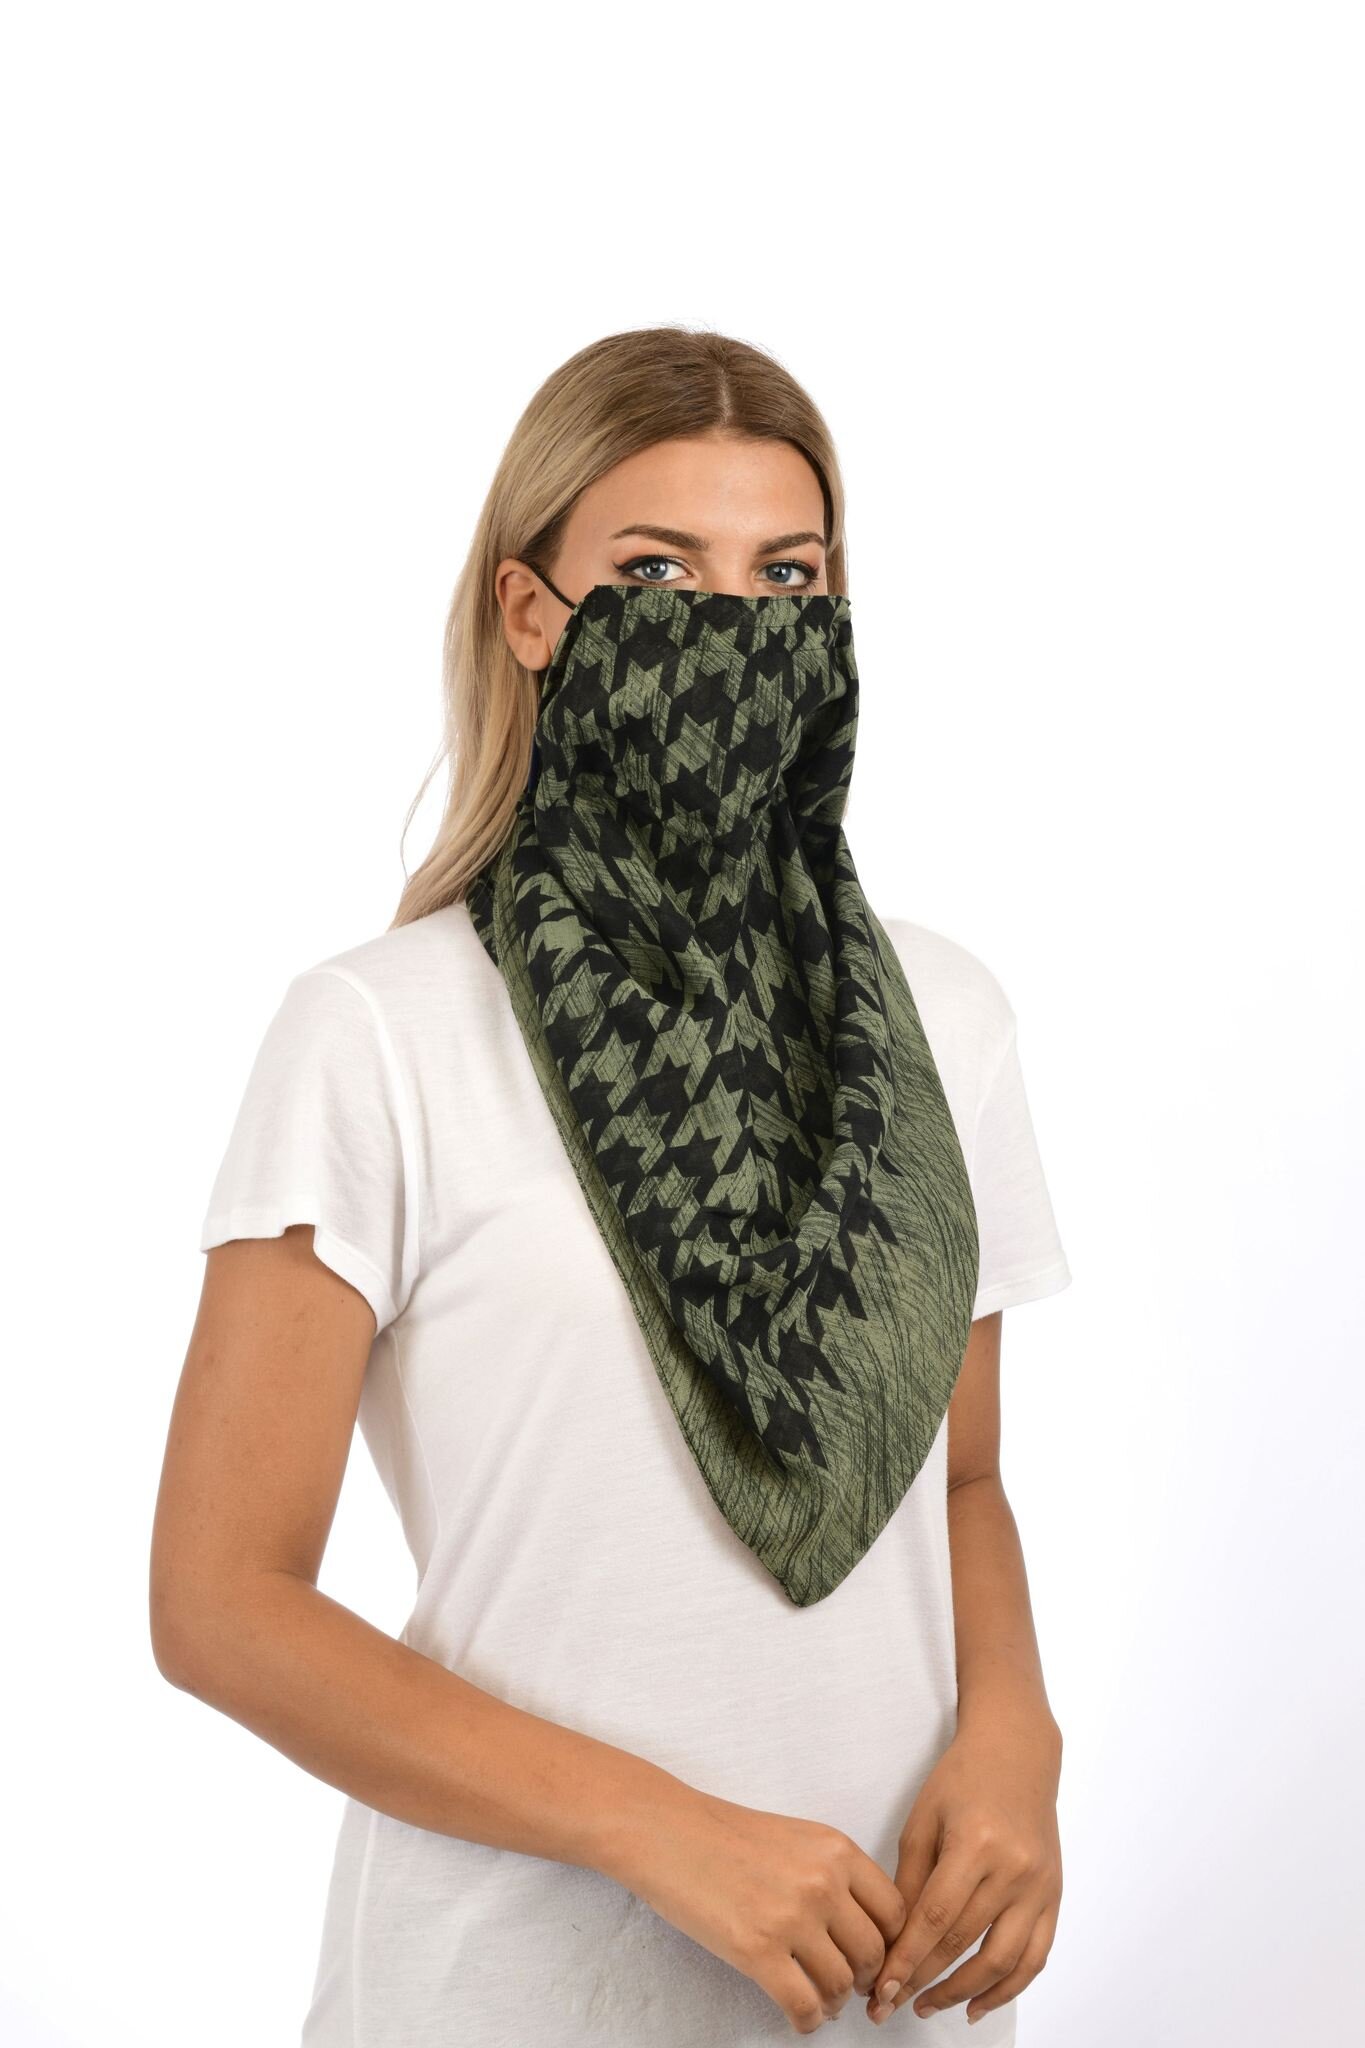 Filtered Bandana Scarf in Green and Black Houndstooth — Remlo Studios